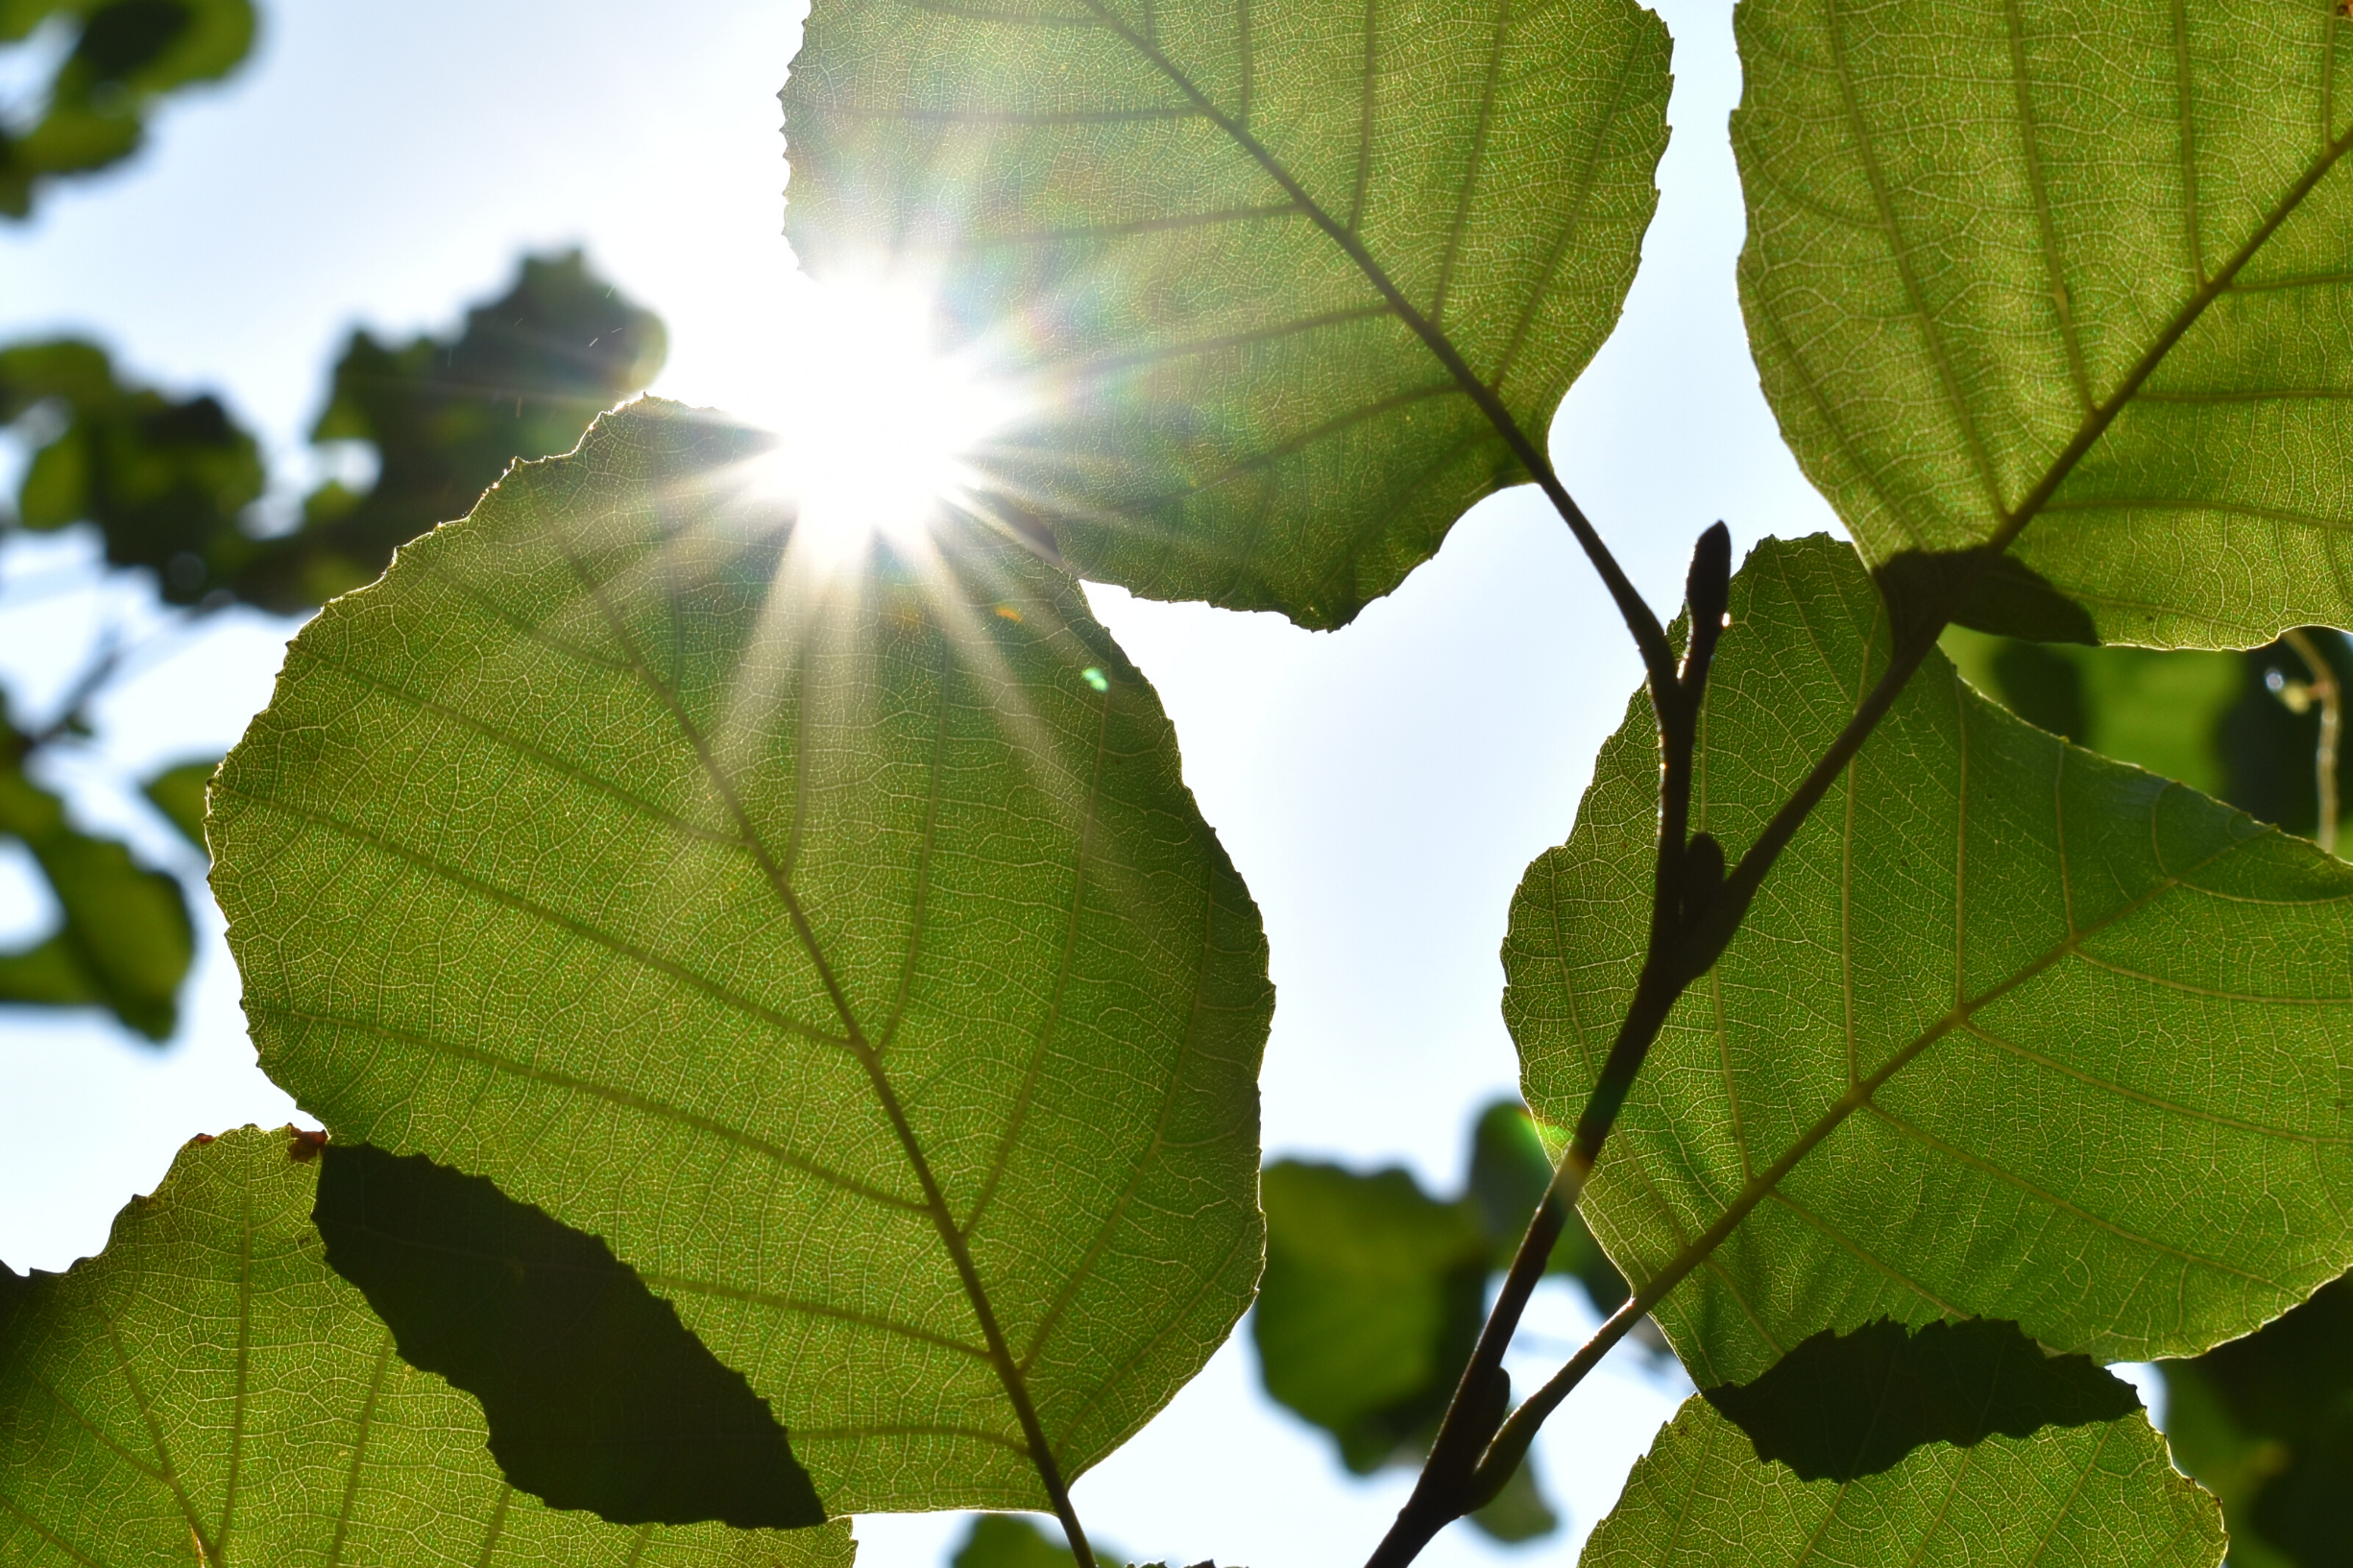 Mental Wellness Picture - Leaves with sunlight shining in background, representative of mental wellness associated with Our Wellness Solution - UWP Six Pillars